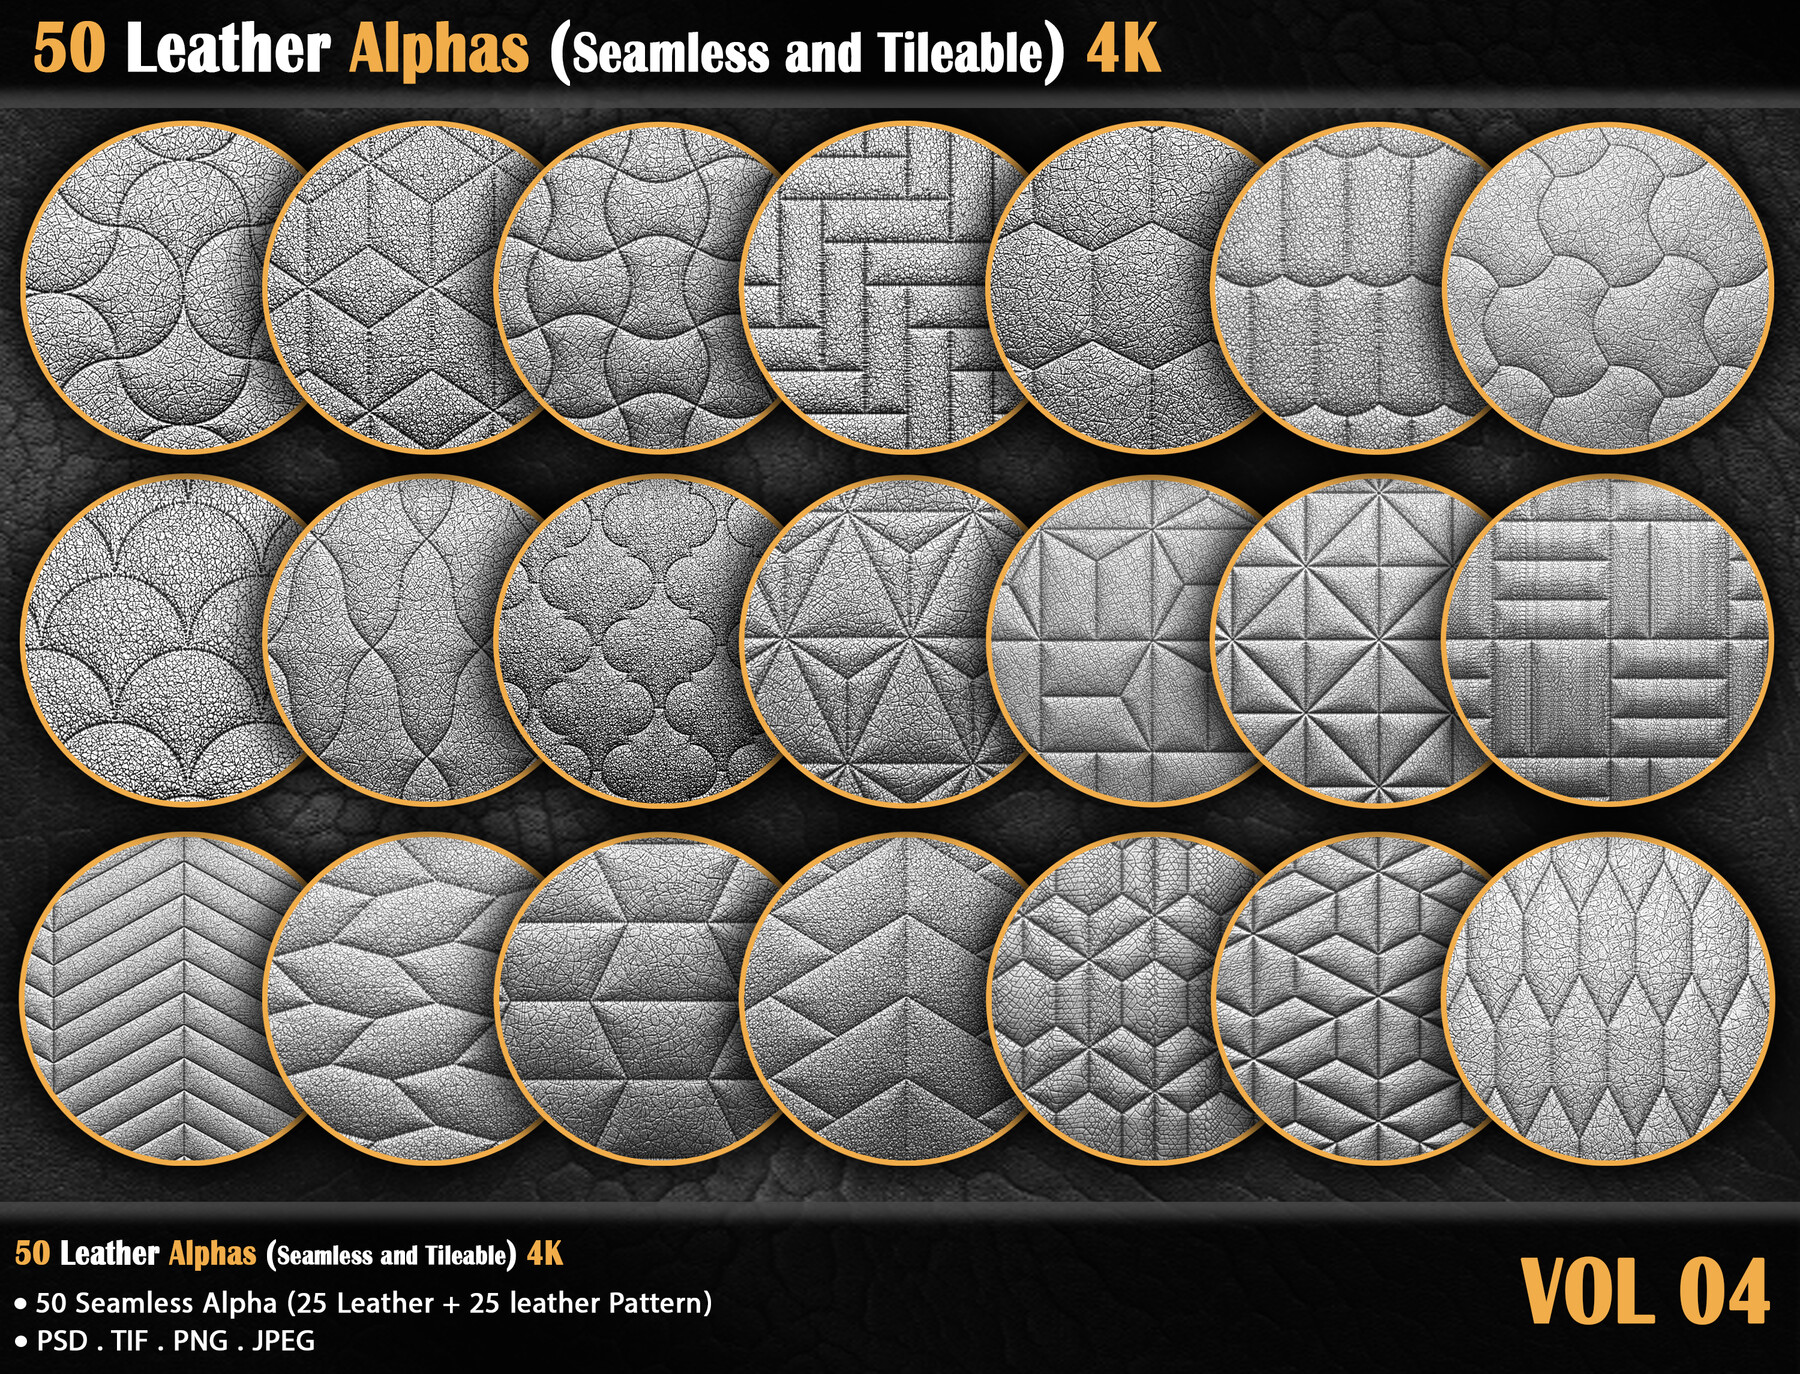 ArtStation - 50 Leather Alphas (Seamless and Tileable) 4K | Brushes